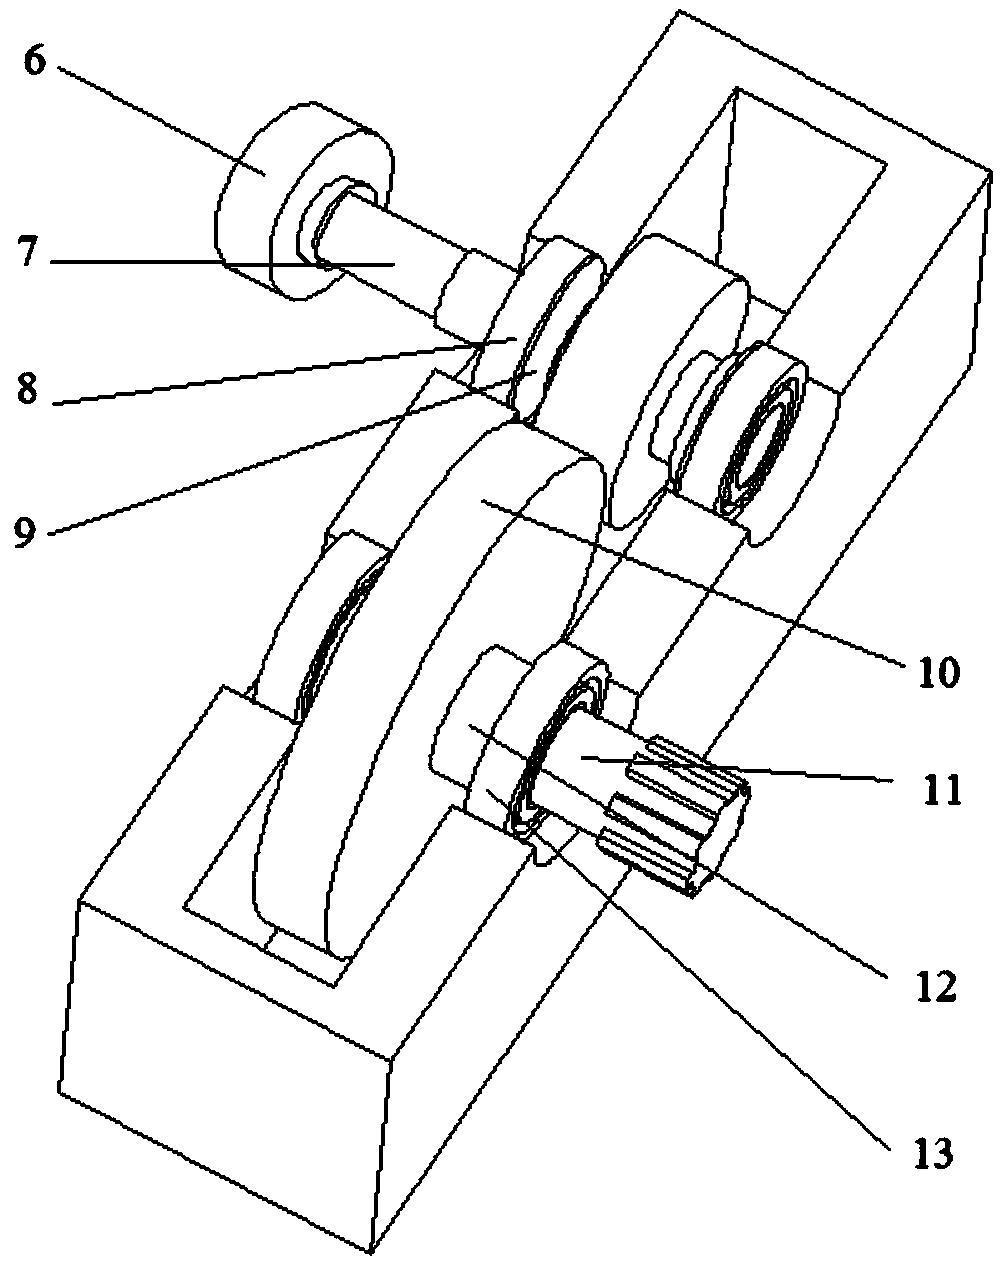 A novel bionic multilegged transport robot and use method thereof